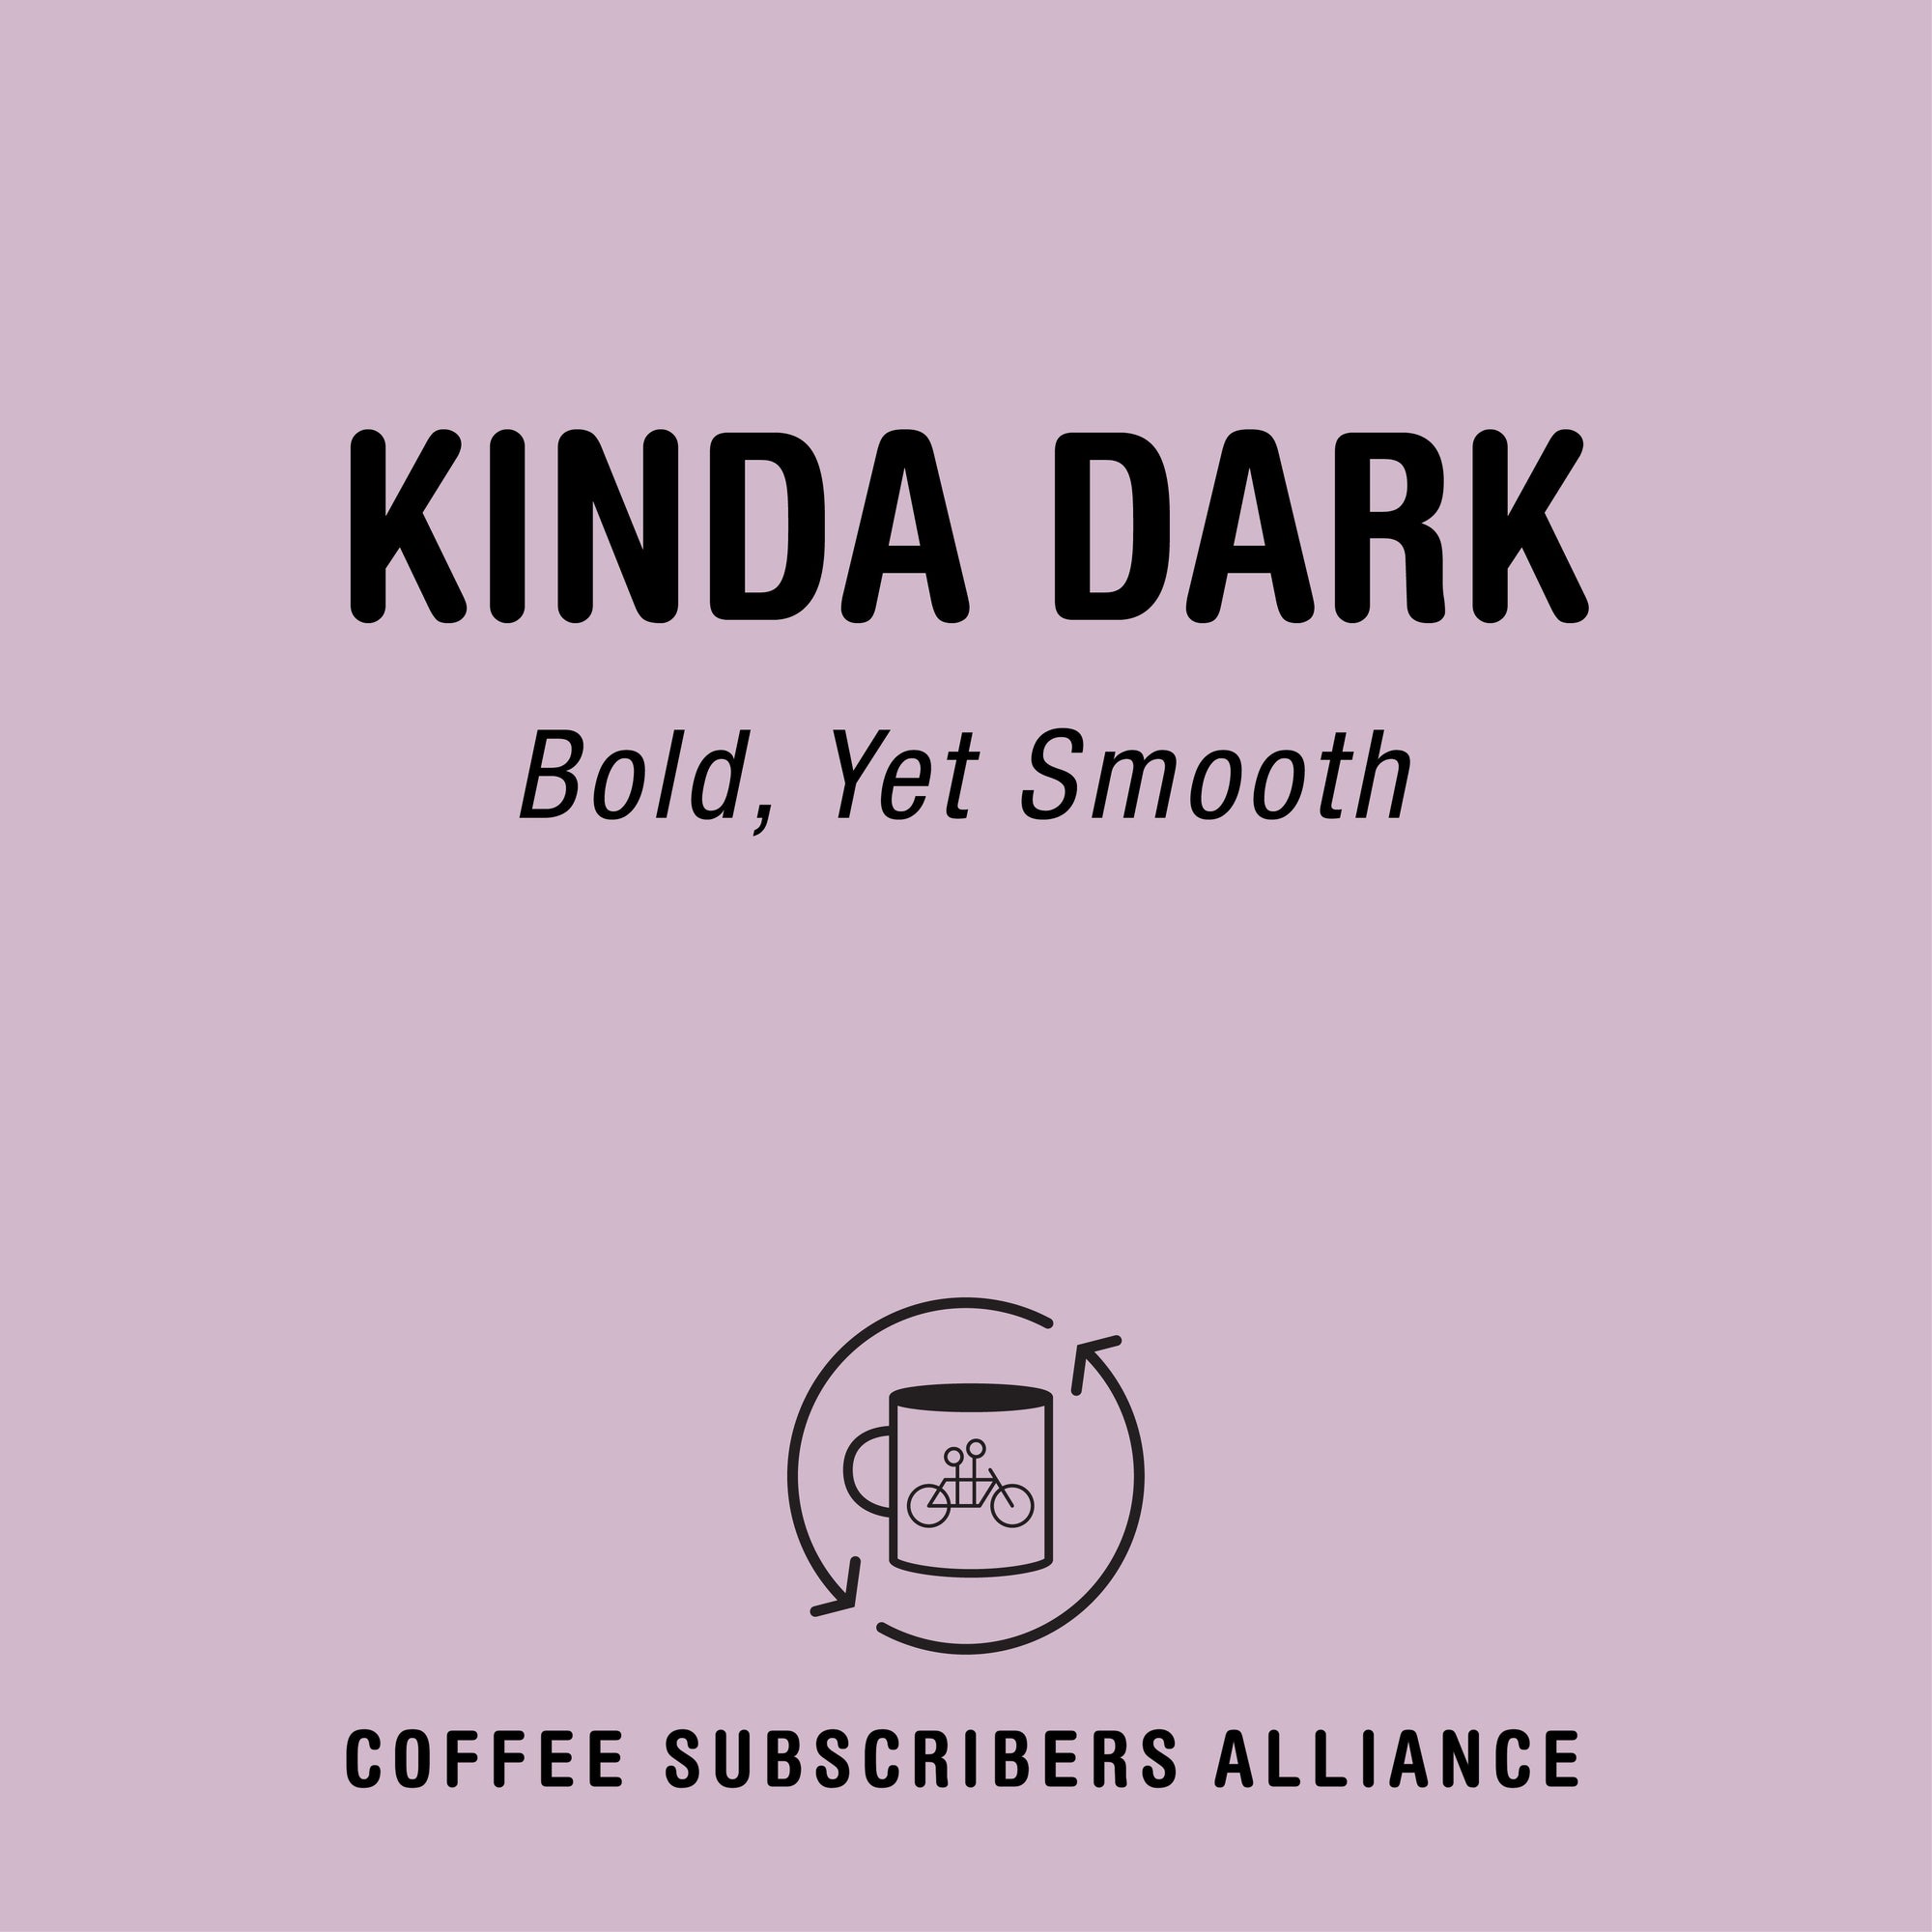 Graphic with text "Kinda Dark, bold yet smooth" over a pastel pink background, featuring a logo of a cup with a coffee bean design, labeled "Tandem whole bean coffee subscription" at the